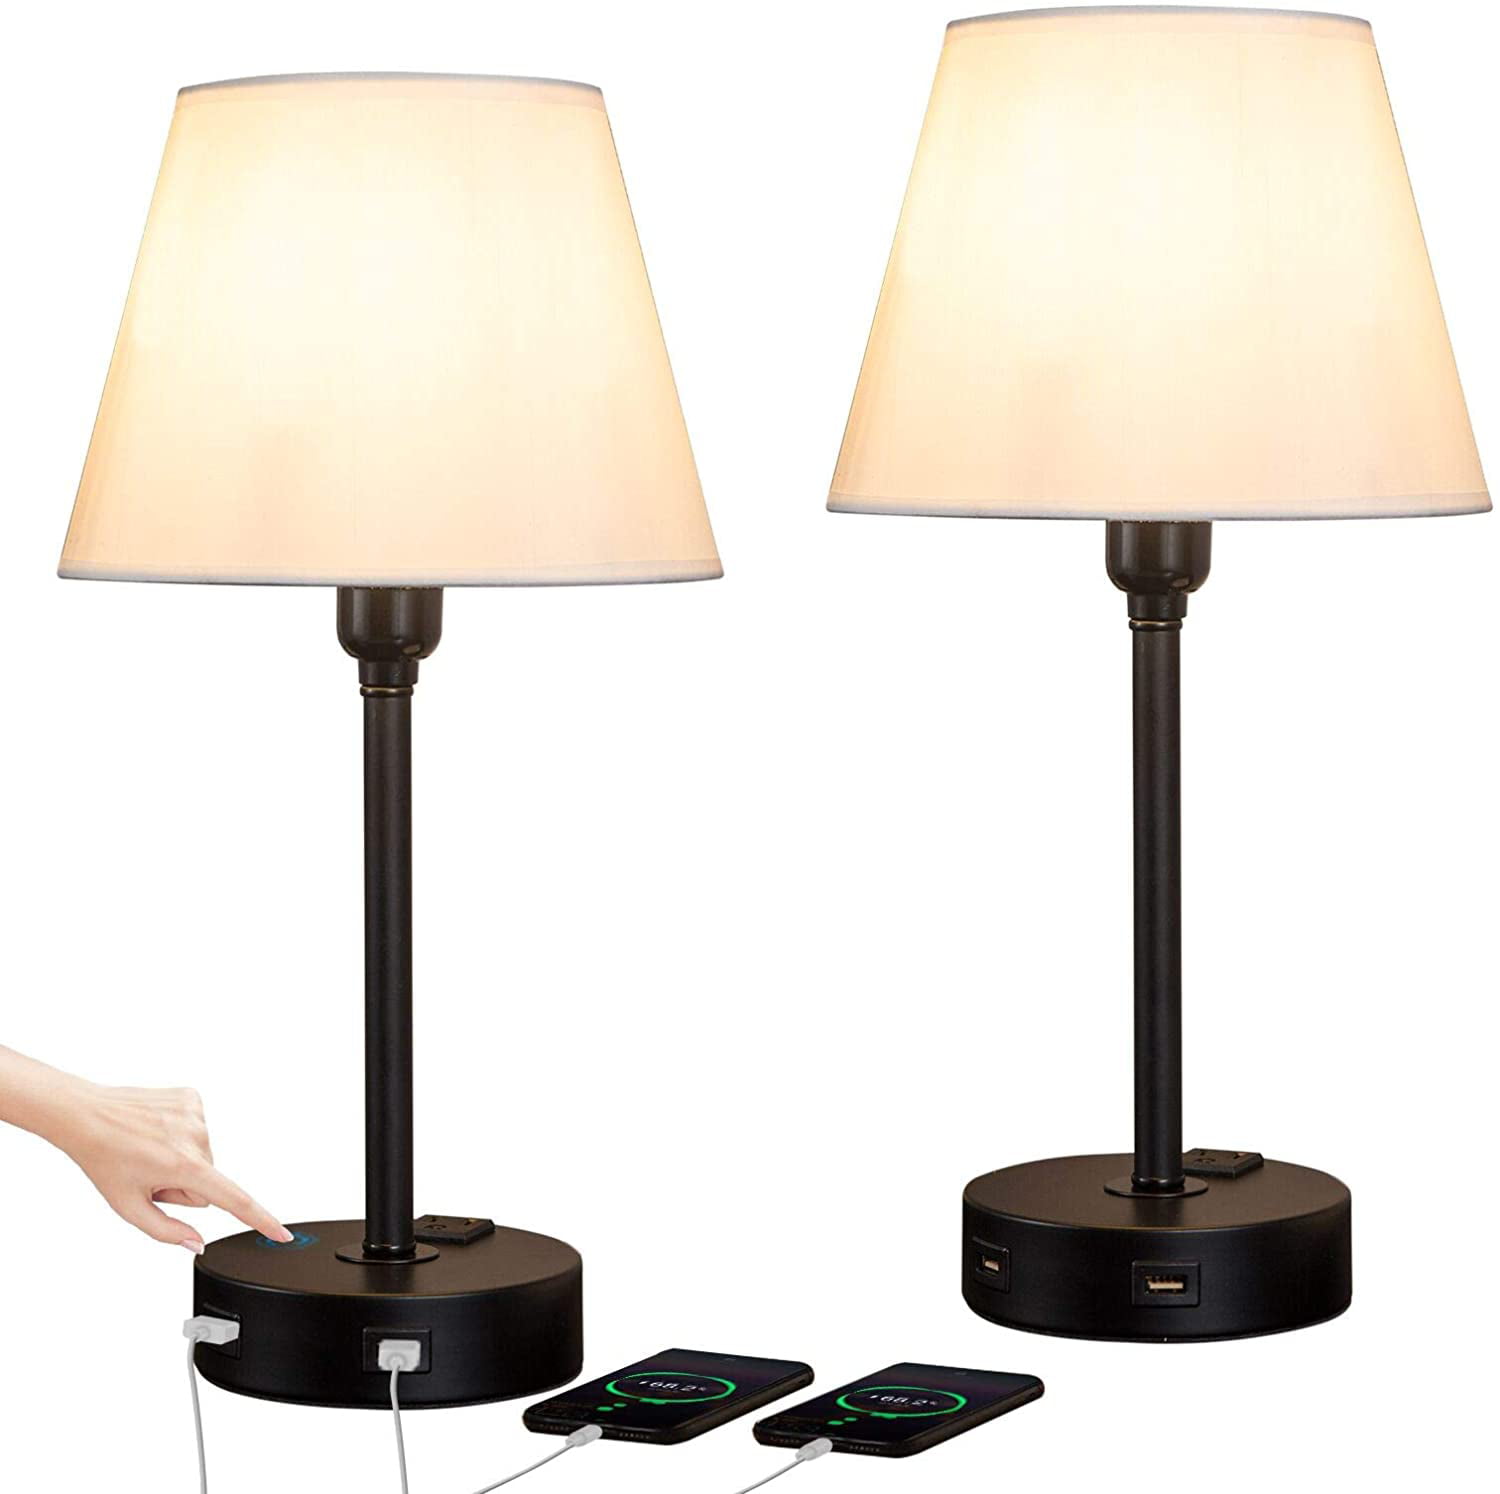 Zeefo Touch Control Table Lamp Built In, Bedroom End Table Lamps With Usb Ports